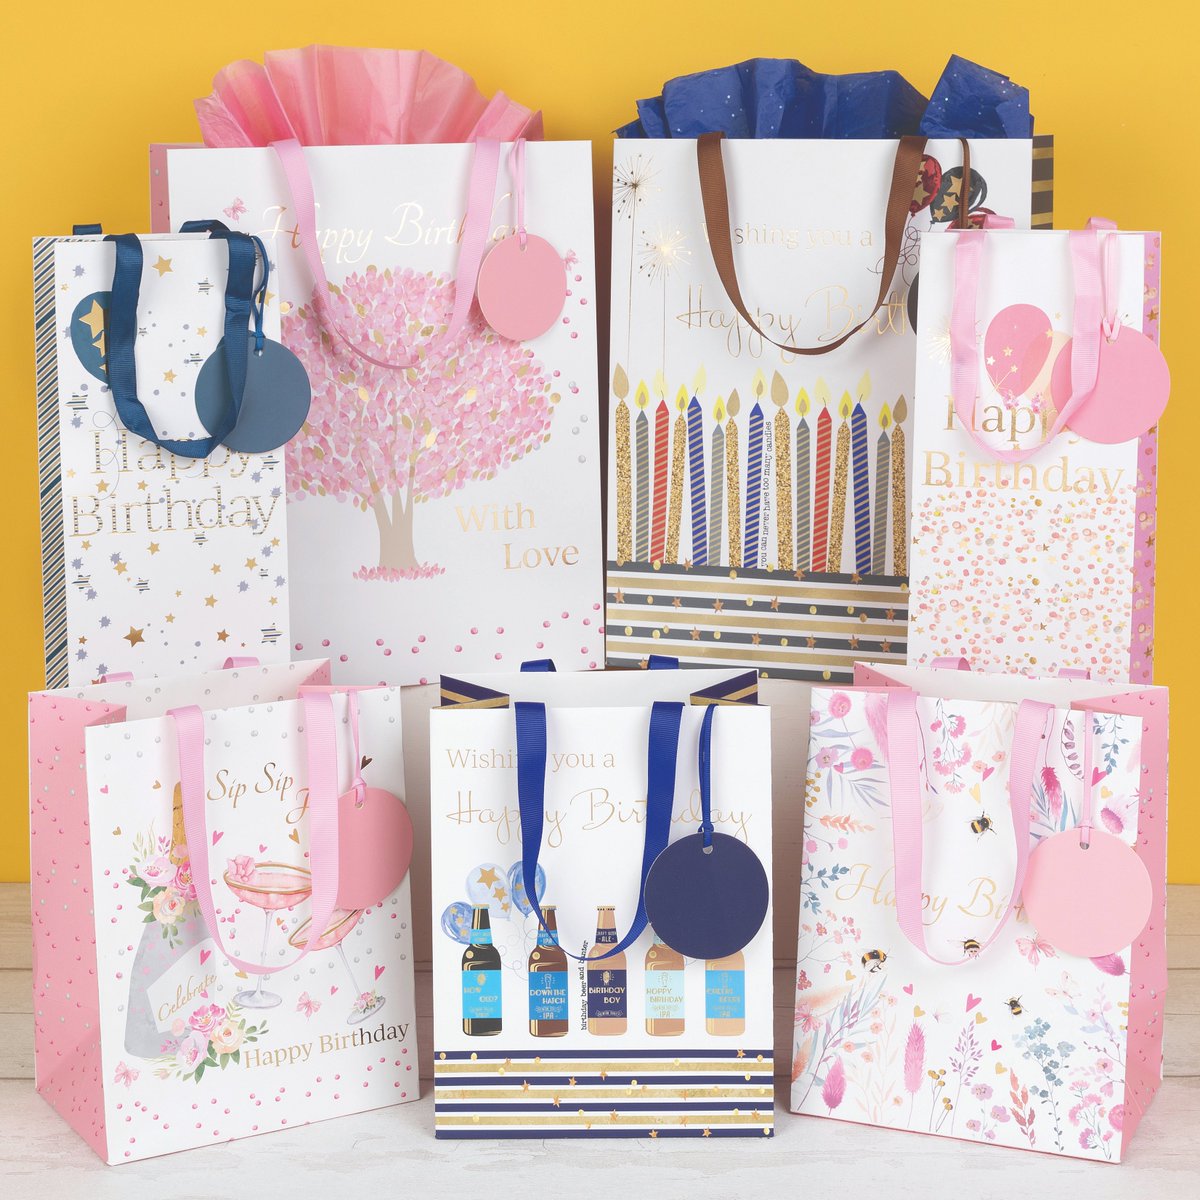 Introducing our amazing Rush Design Gift Bags. From elegant designs to charming patterns, we've got something for every occasion including birthdays, weddings, and baby. Follow the link below to see the full range; shop.joedavies.co.uk/range/wr13846 #thoughtfulgifting #spreadjoyandlove